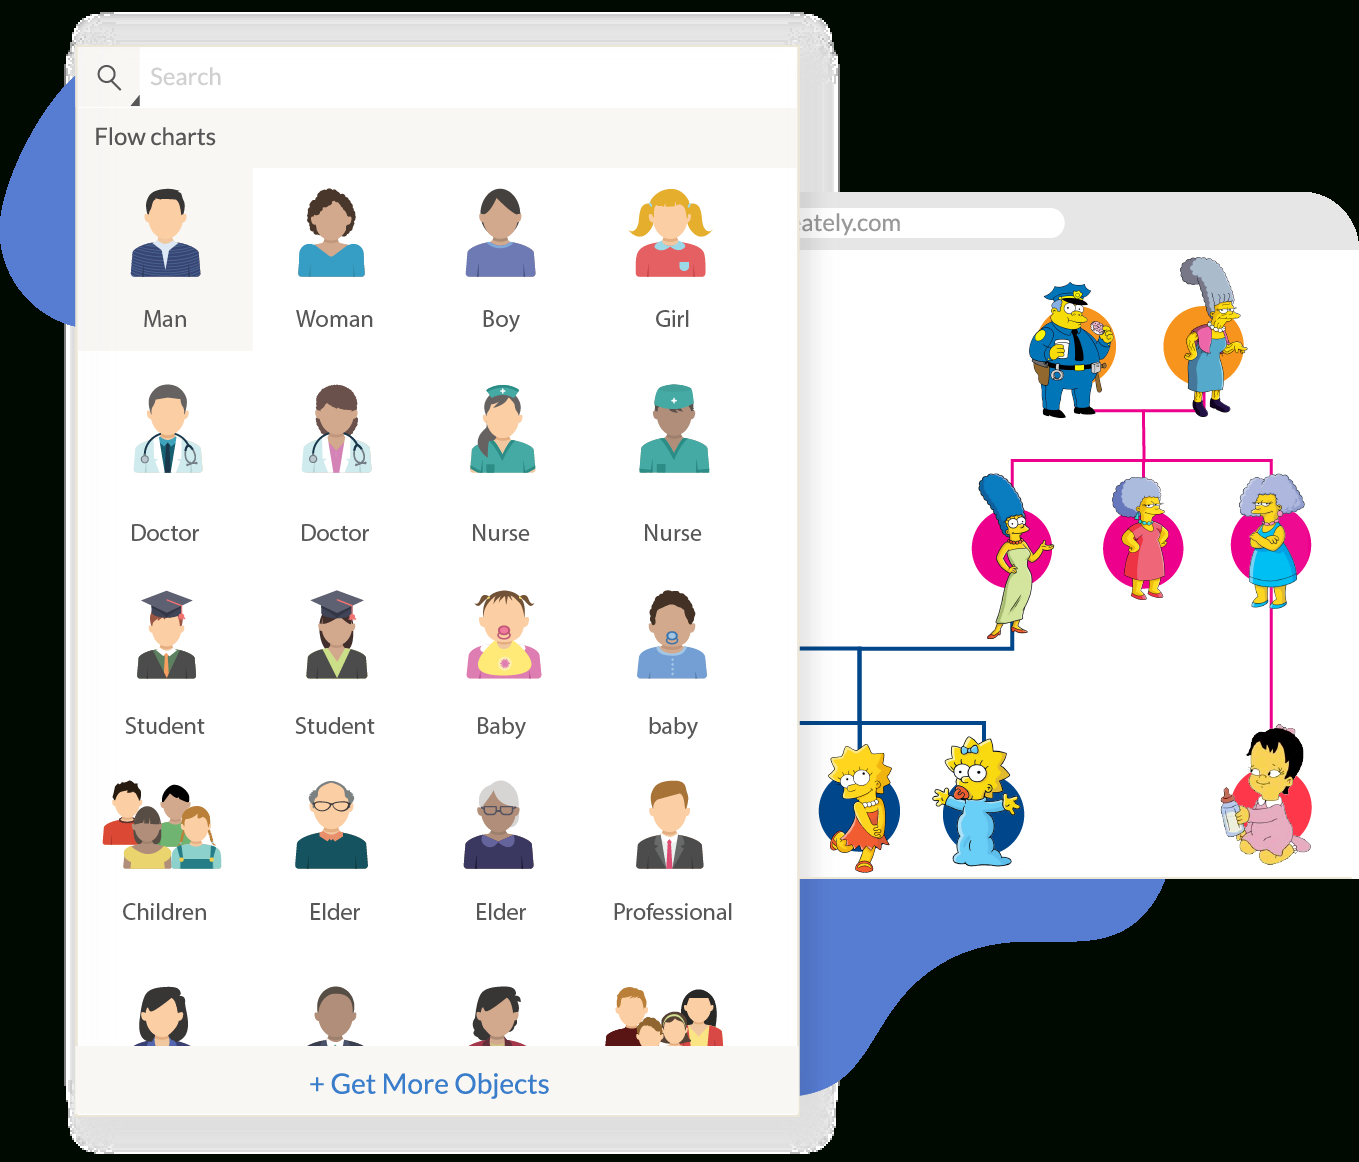 Family Tree Builder 8.0.0.8642 instal the new version for windows